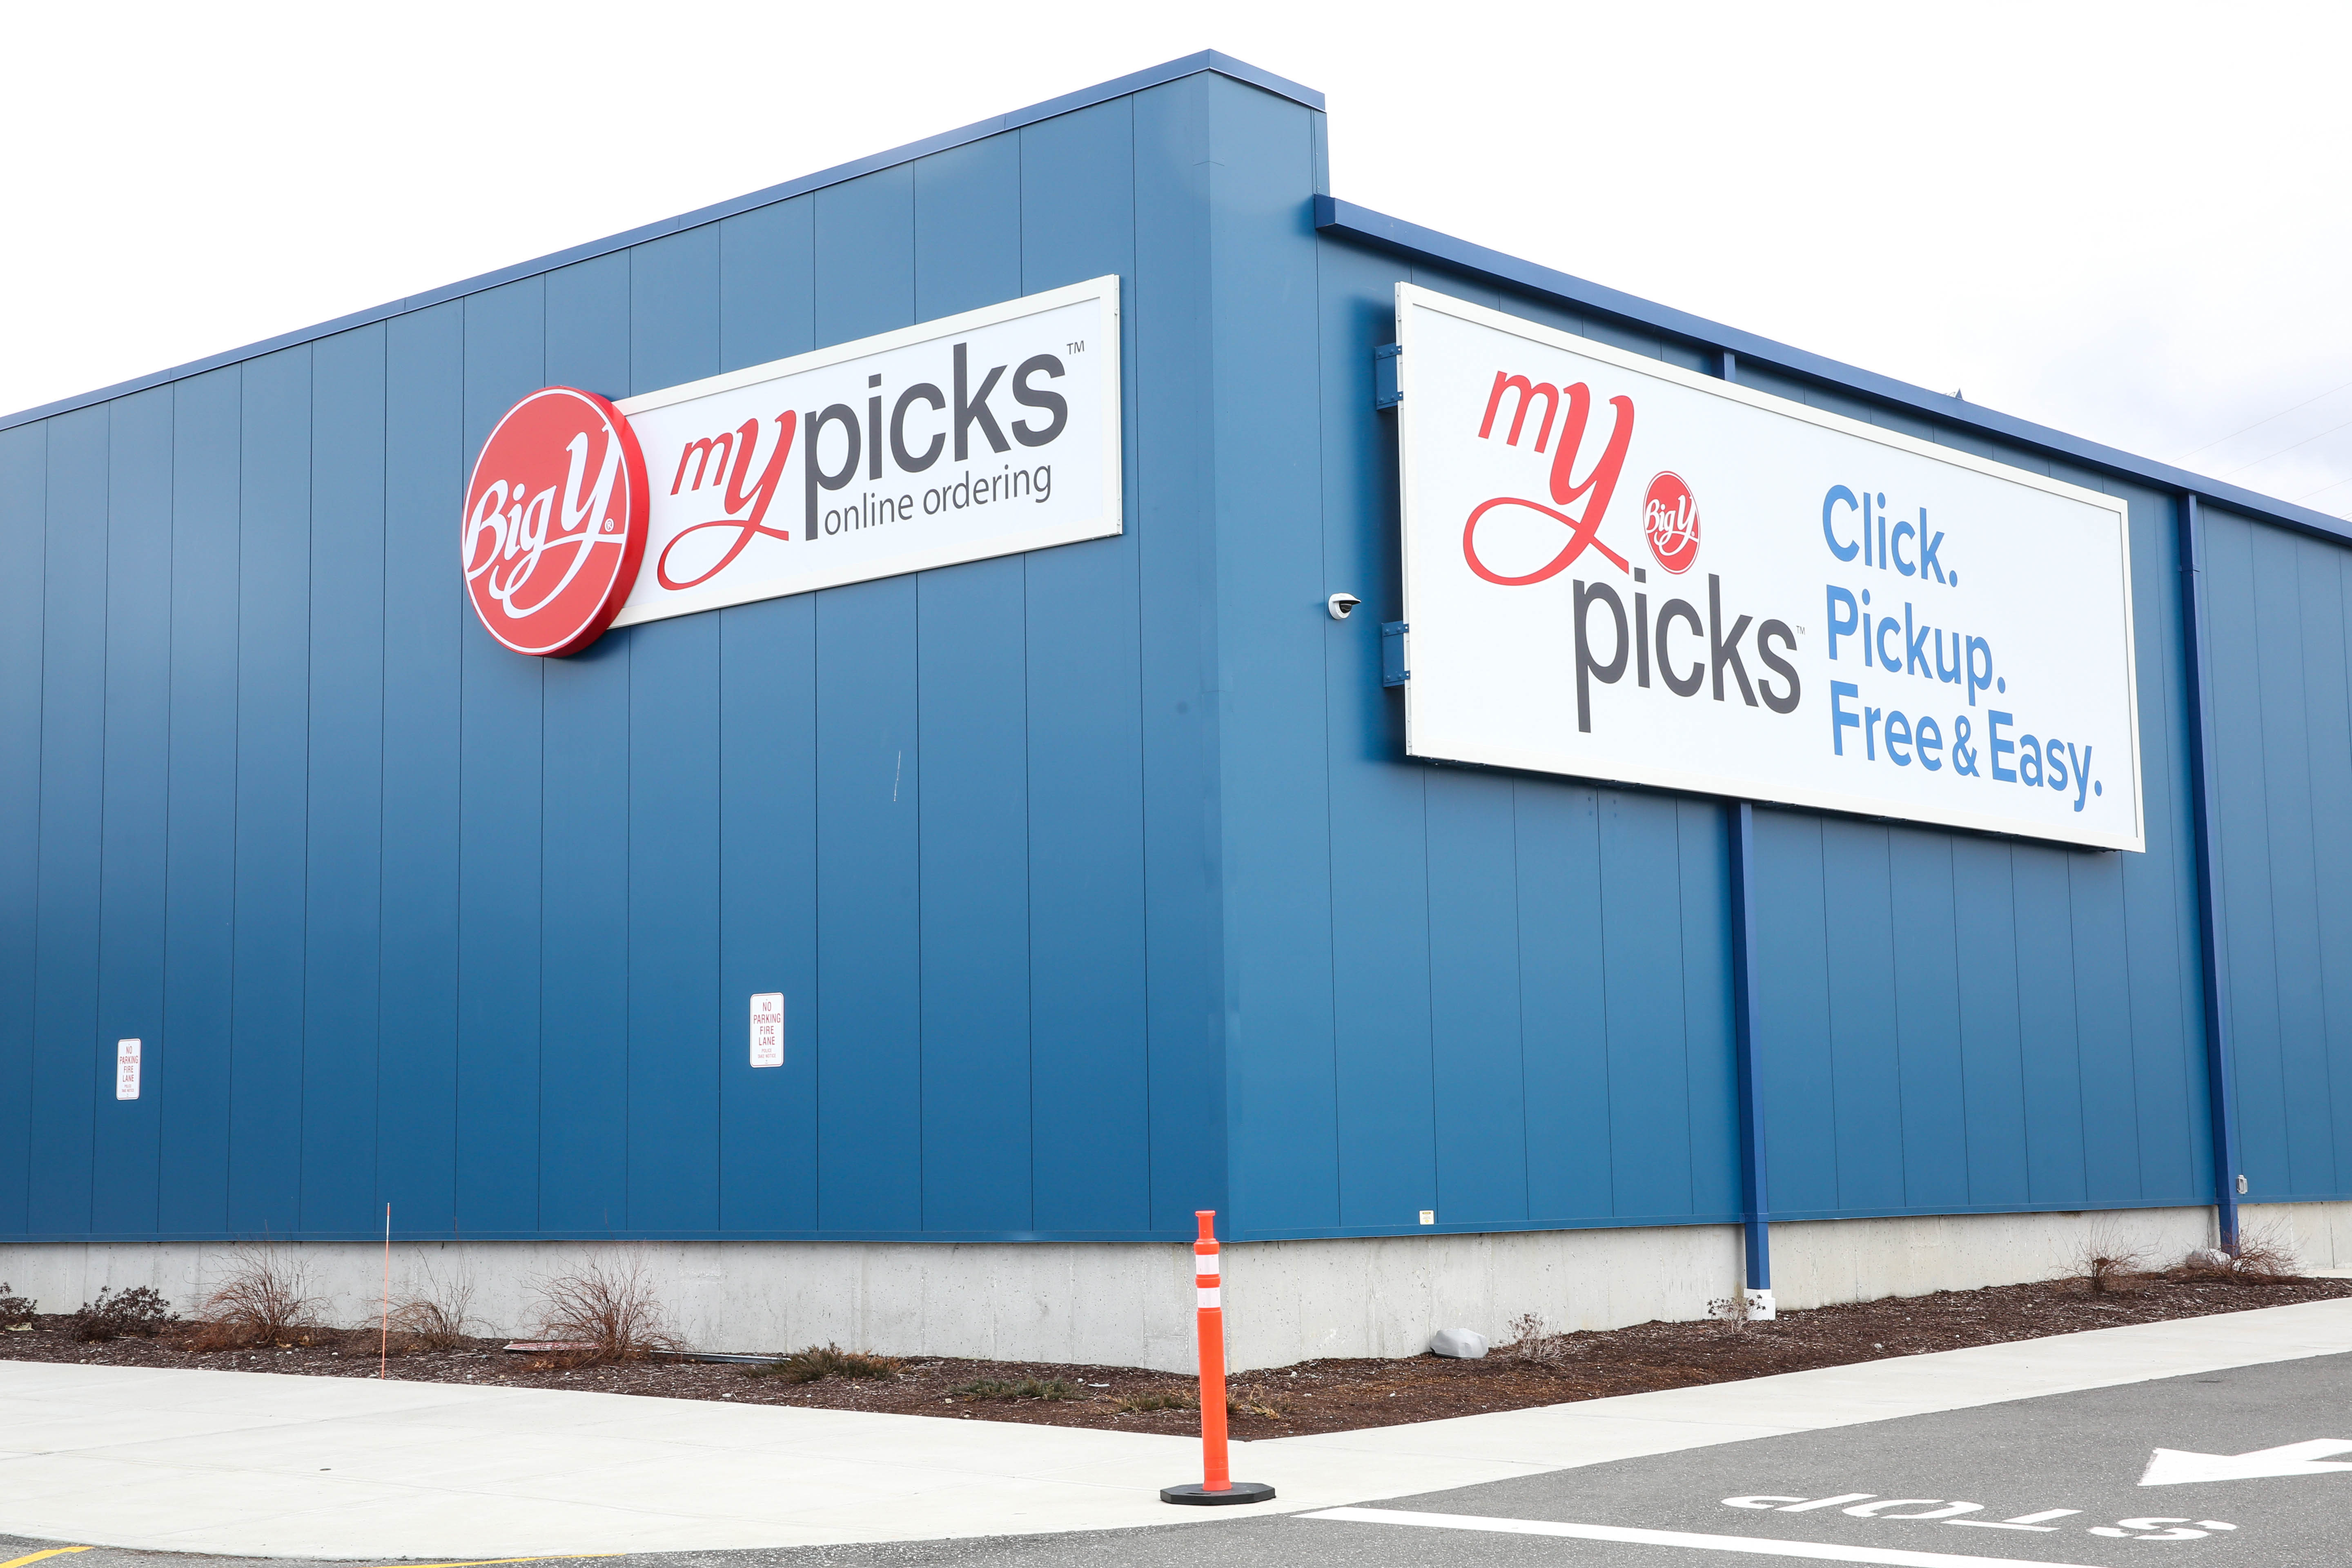 How Big Y’s micro-fulfillment center has boosted e-commerce sales